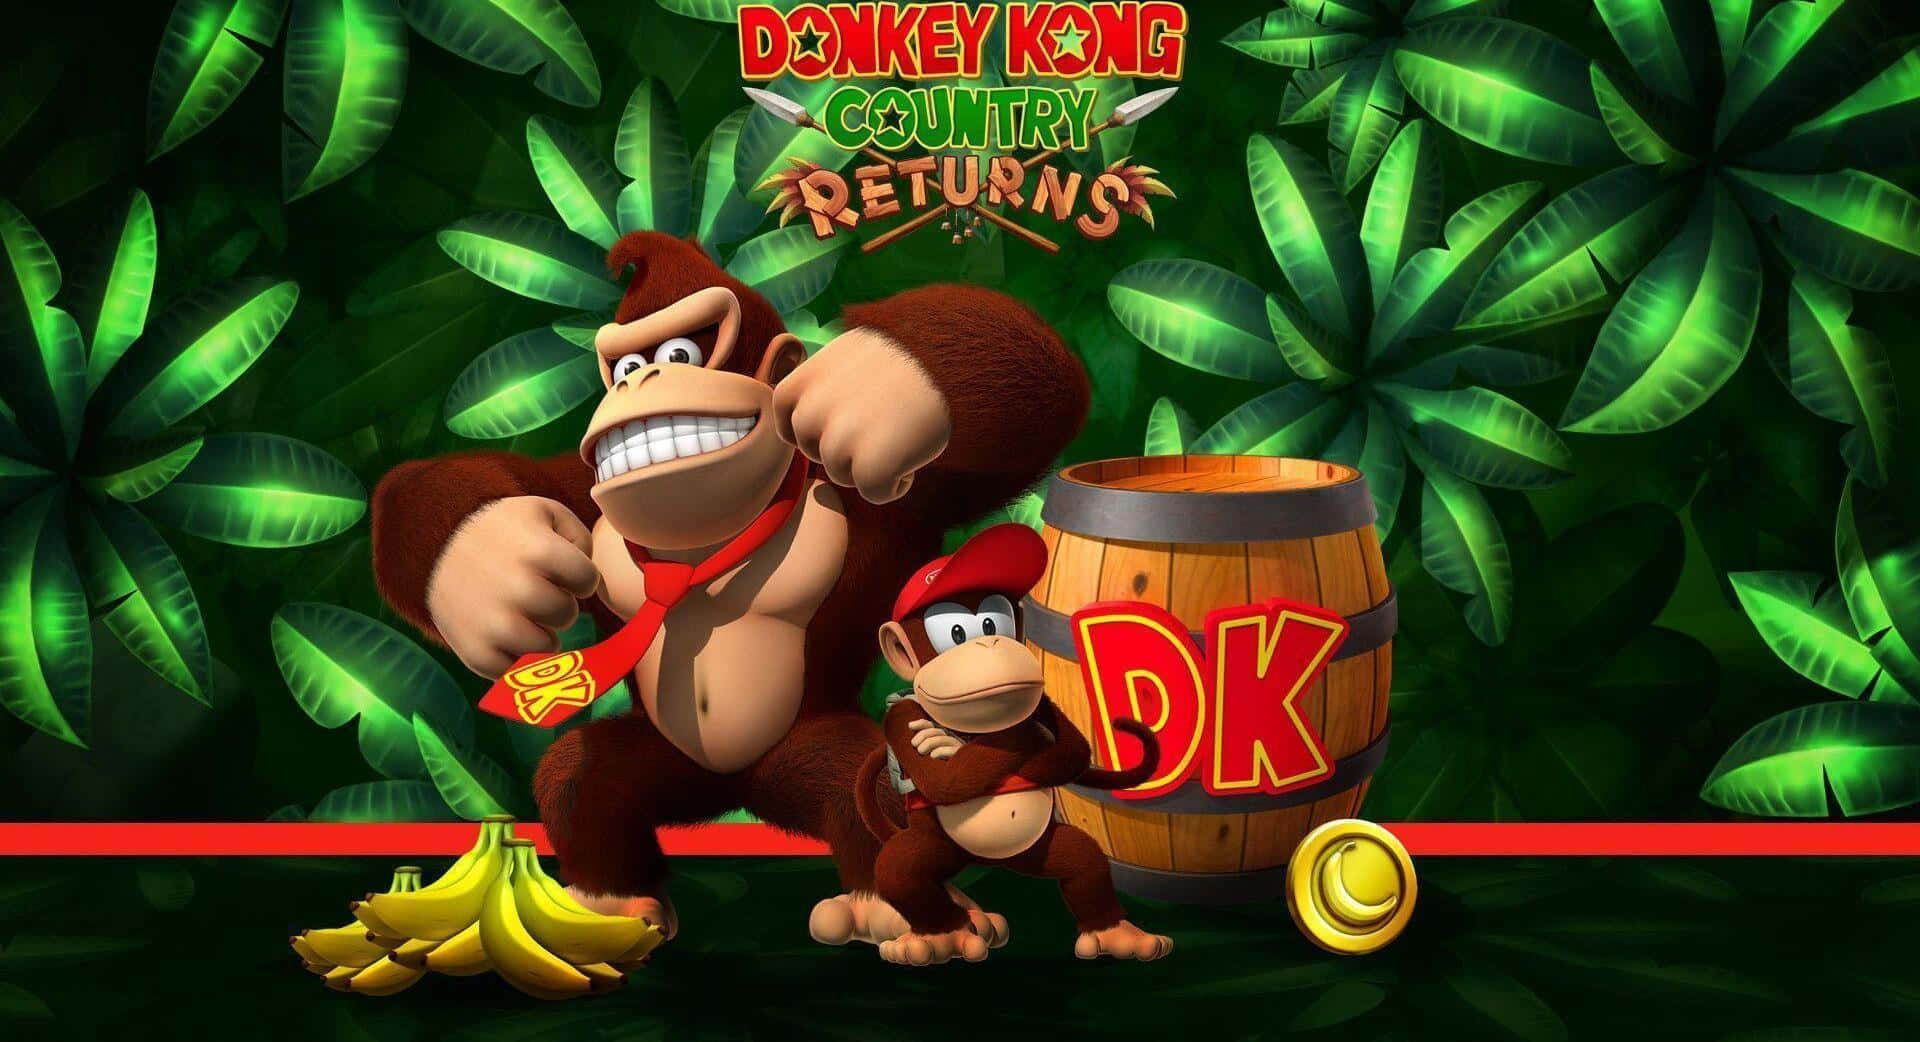 Donkey Kong Leaping Through The Air With Giant Fists Ready Background